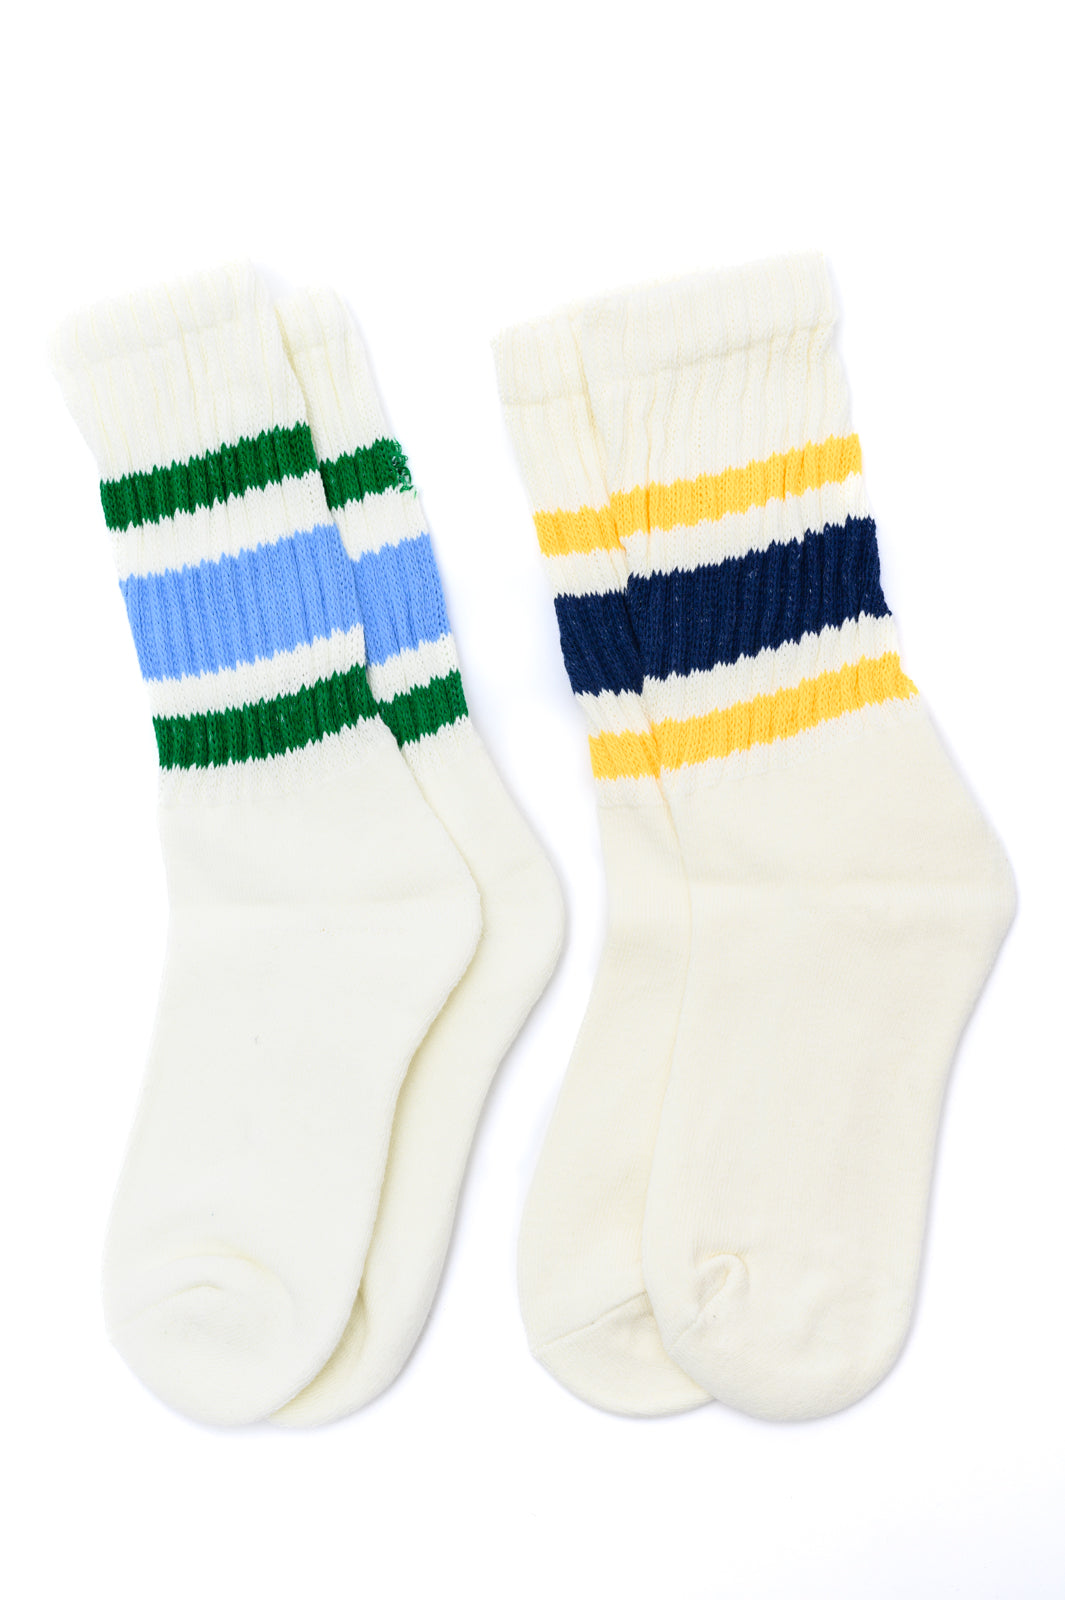 Scalloped Socks in Green and Blue